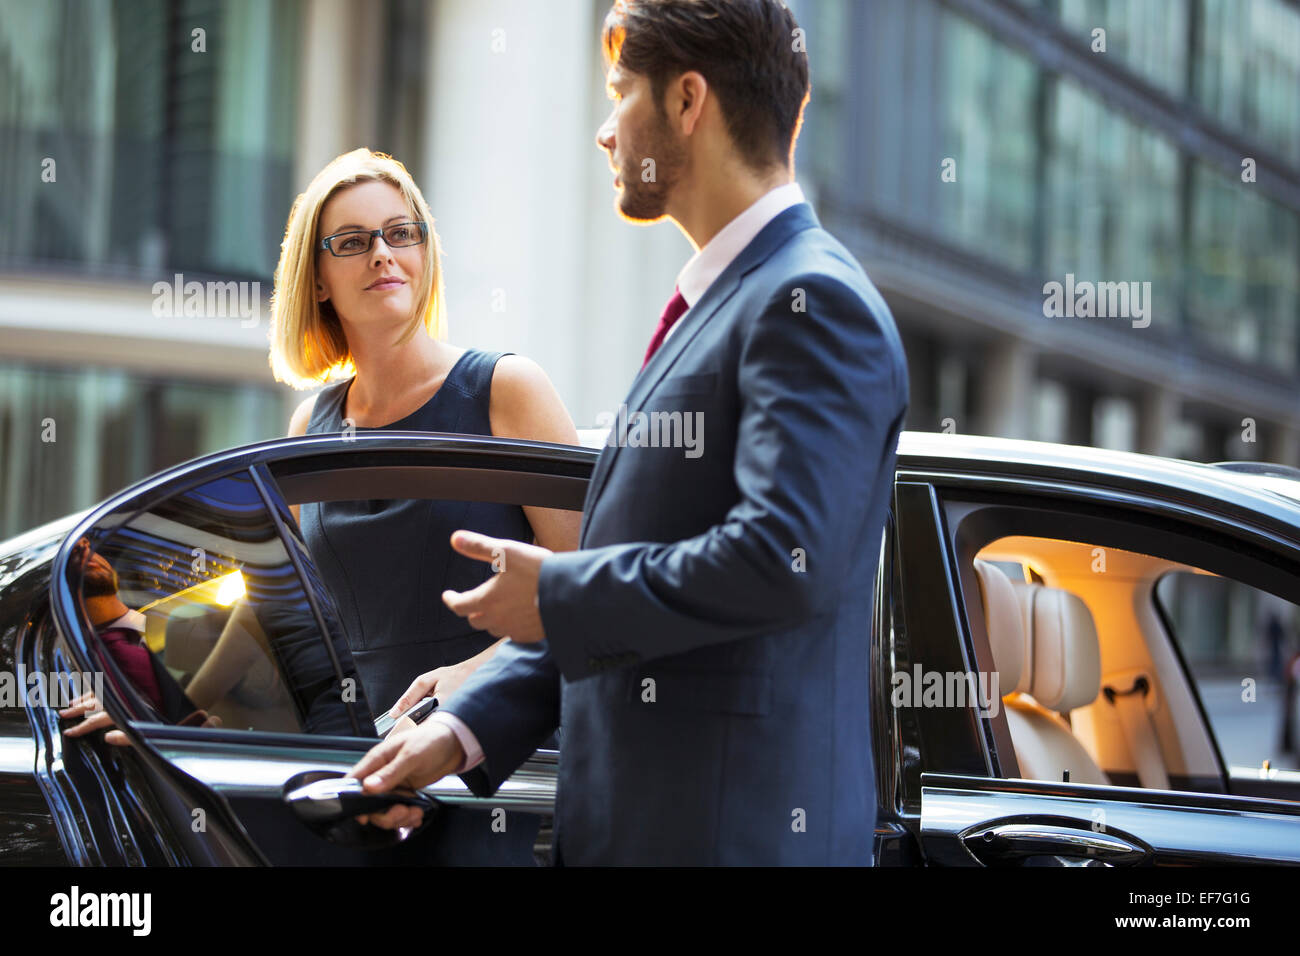 Chauffeur opening car door for businesswoman Stock Photo